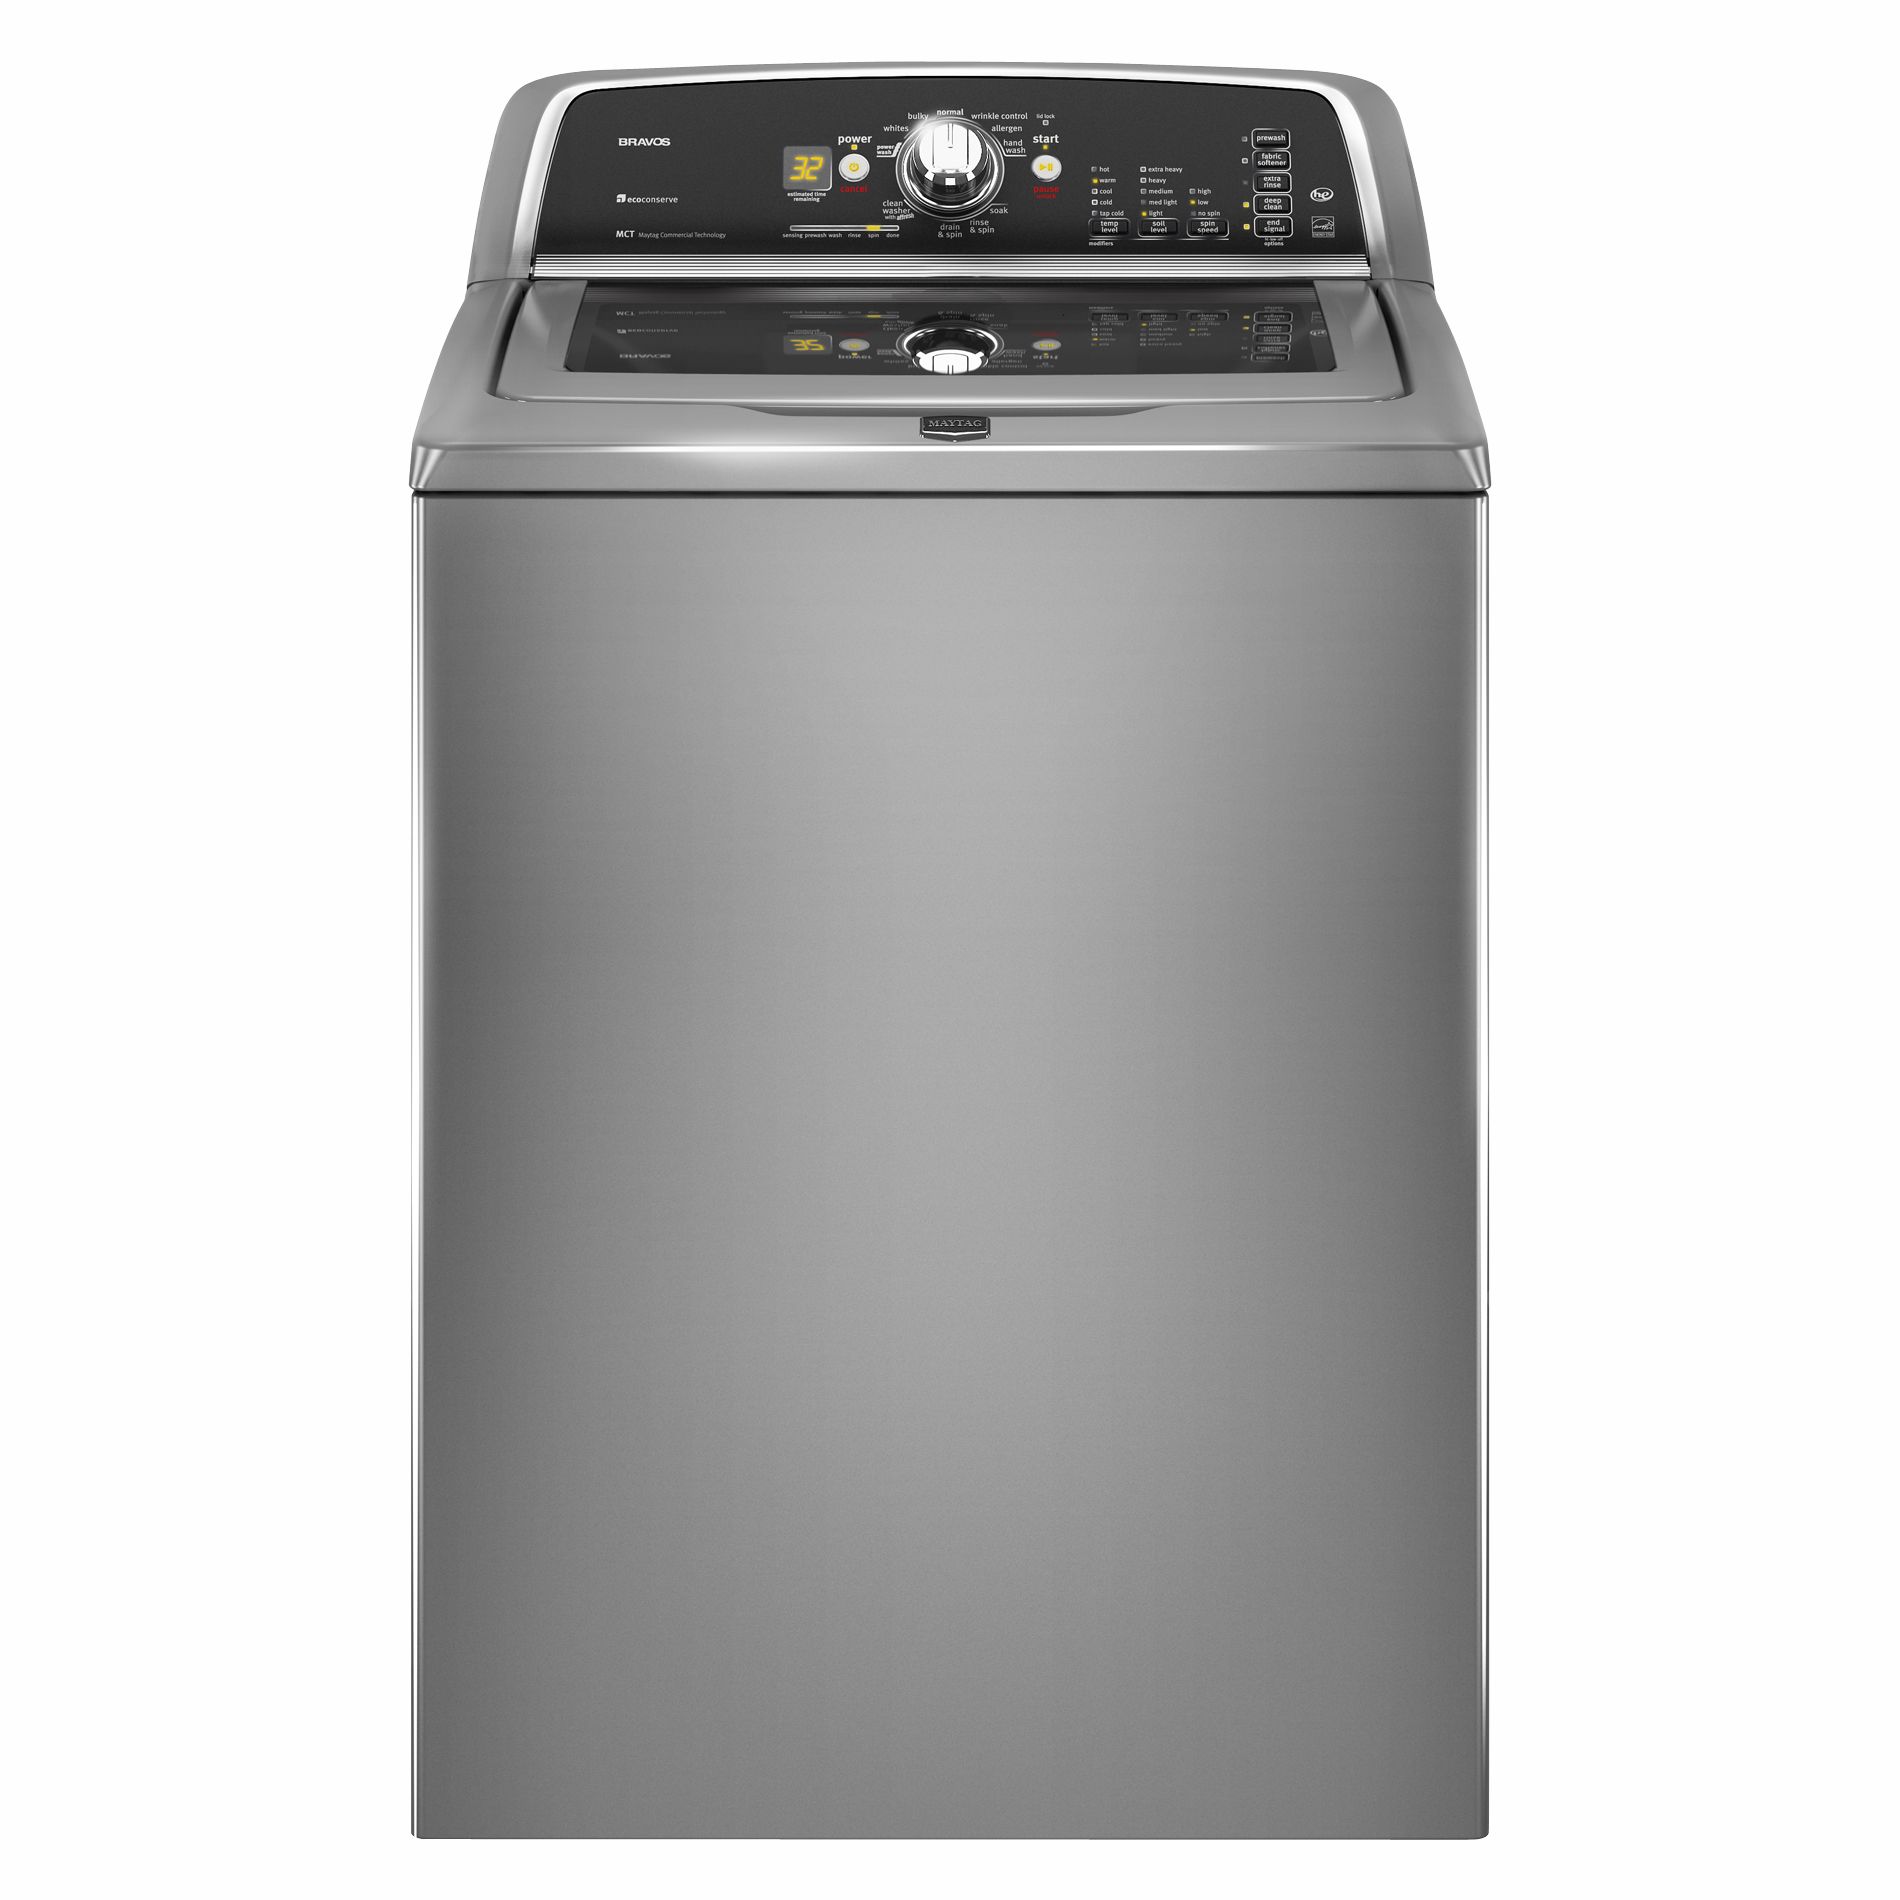 How To Fix The Error Code F54 For Maytag Washing Machine